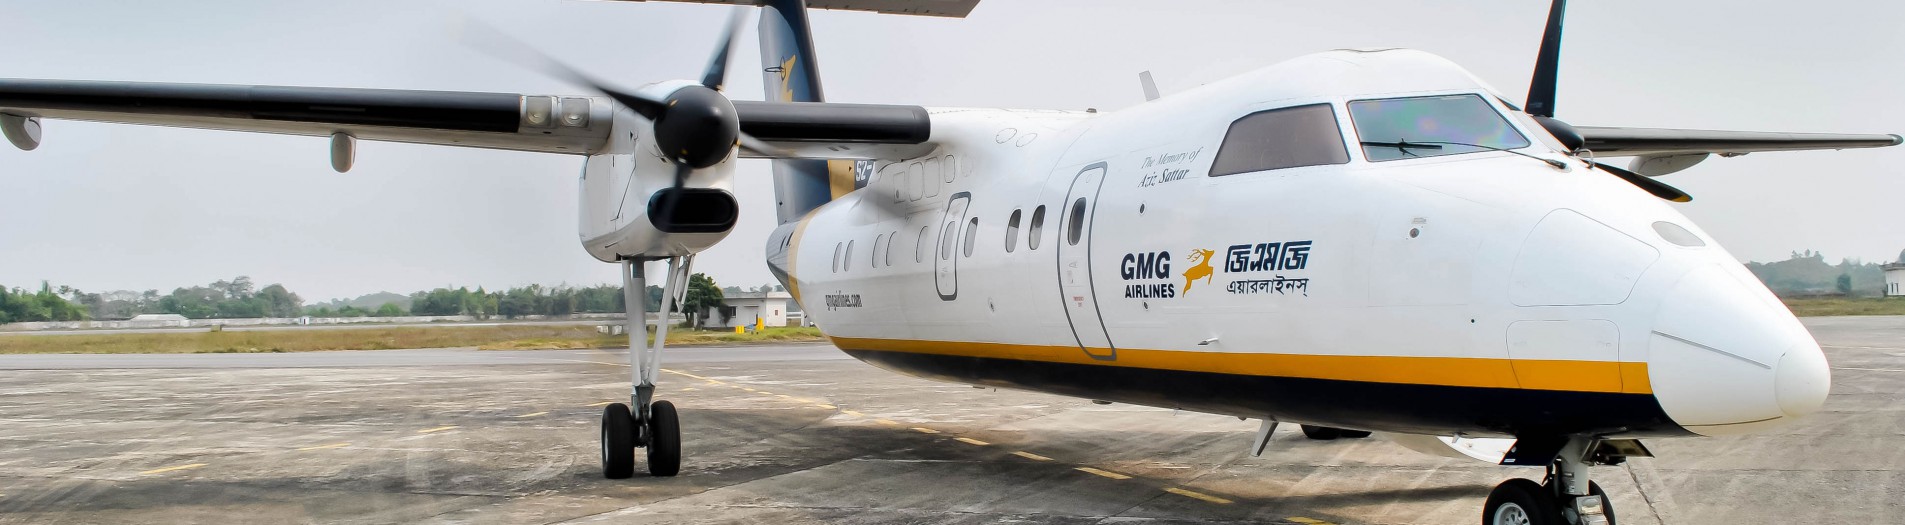 Dash 8-100 GMG Airlines